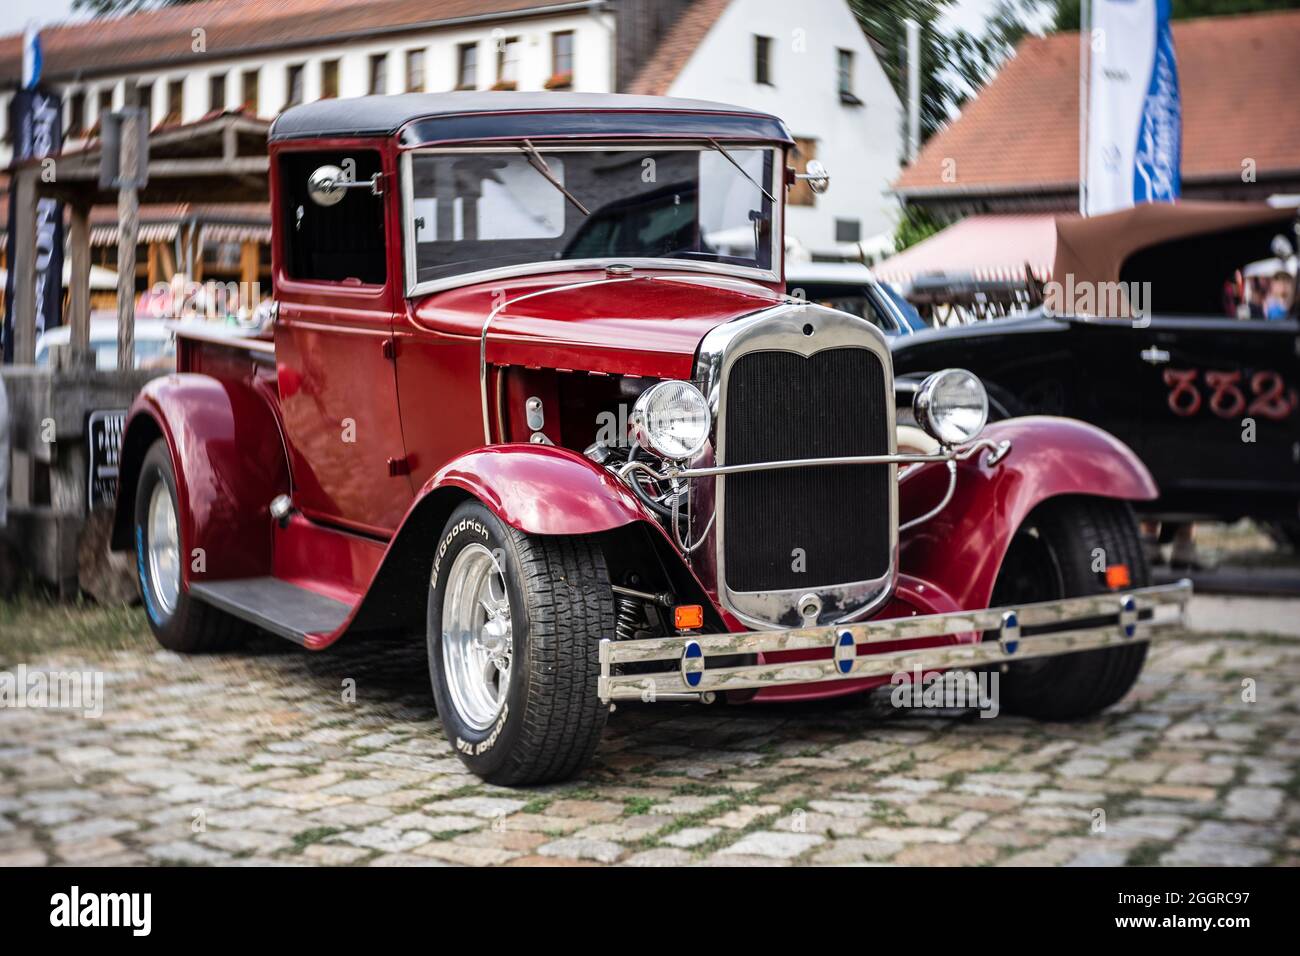 DIEDERSDORF, GERMANY - AUGUST 21, 2021: The pickup truck Chevrolet, 1930. Focus on center. Swirly bokeh. The exhibition of 'US Car Classics'. Stock Photo